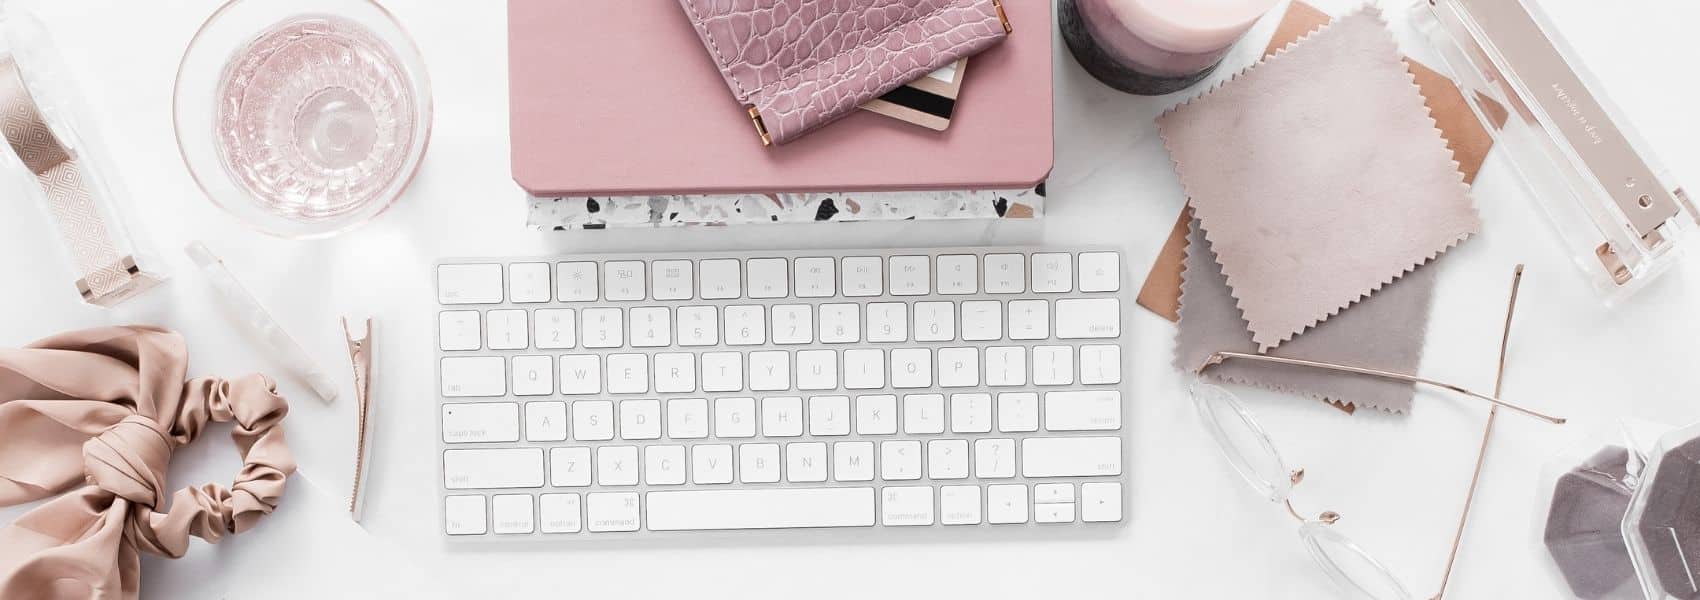 Flatlay photo of a keyboard and other office supplies artfully arranged on a desk.